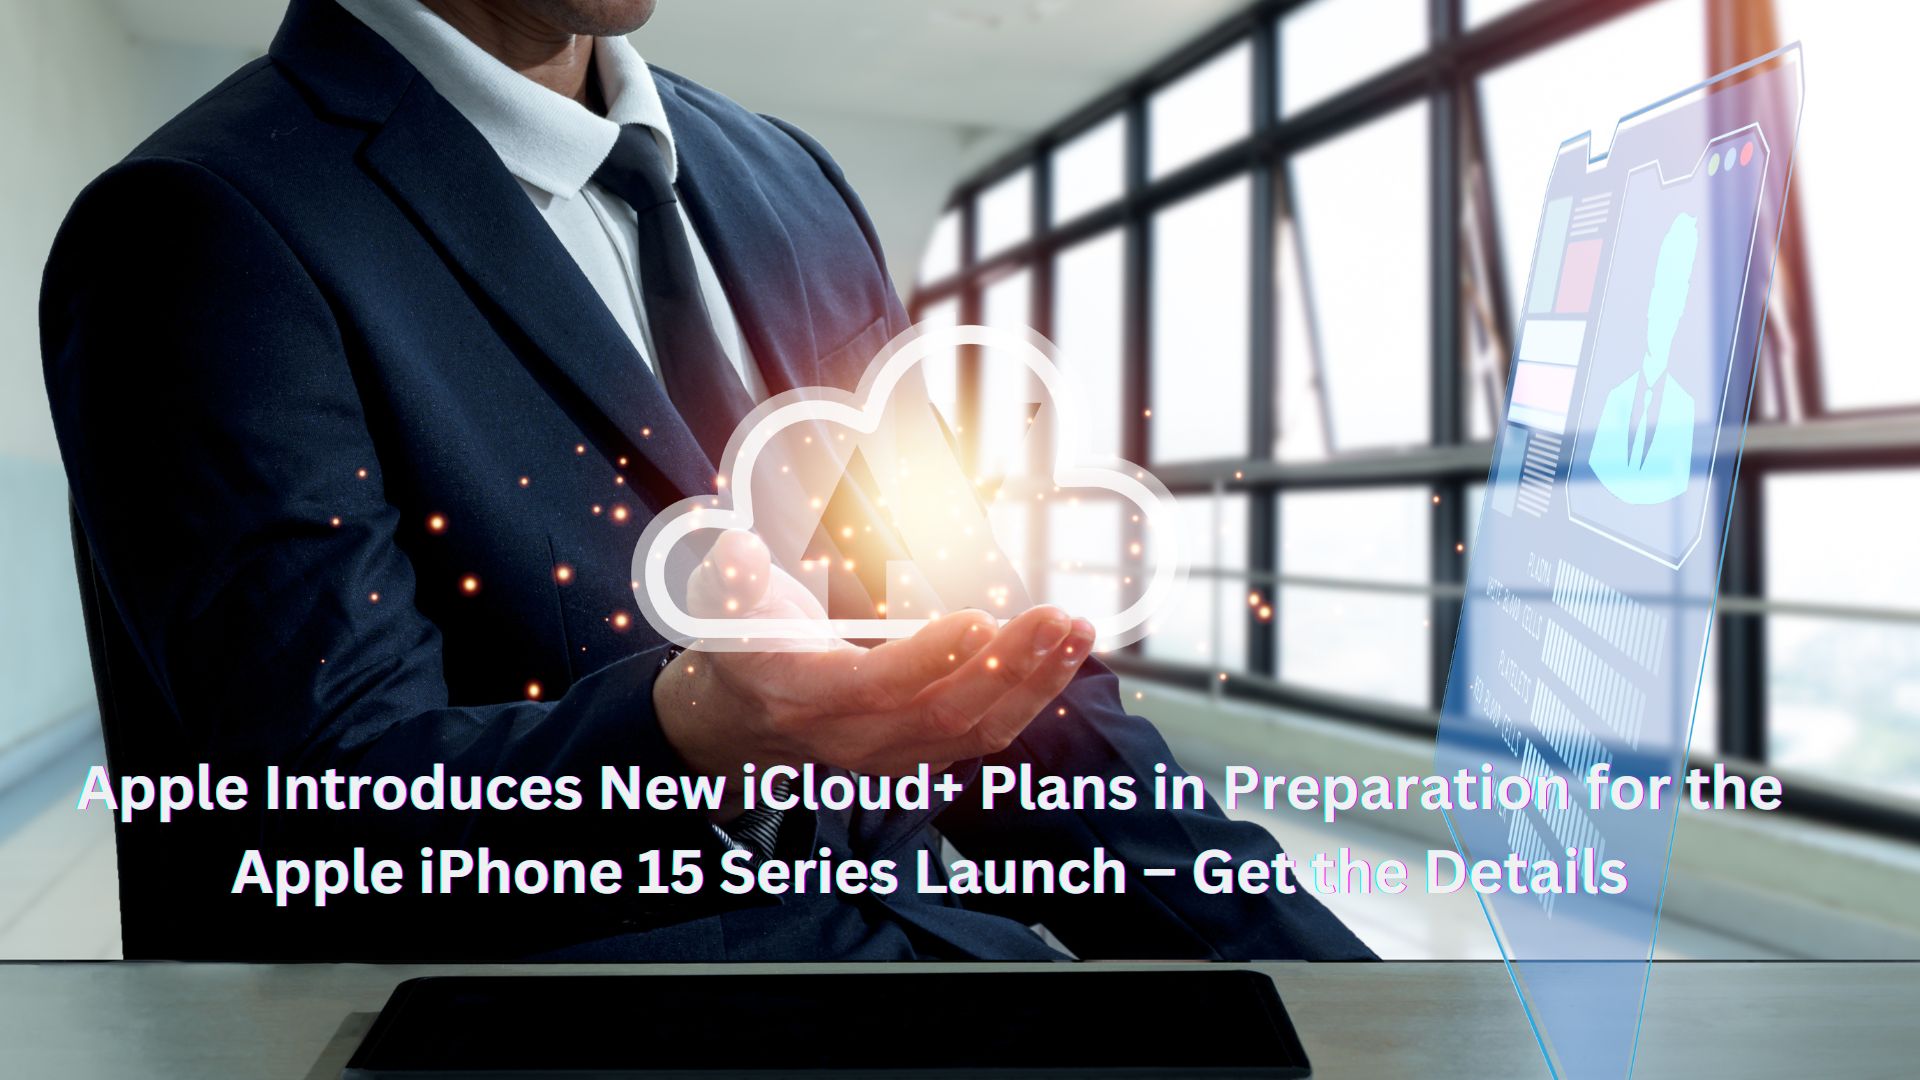 Apple Introduces New iCloud+ Plans in Preparation for the Apple iPhone 15 Series Launch – Get the Detail